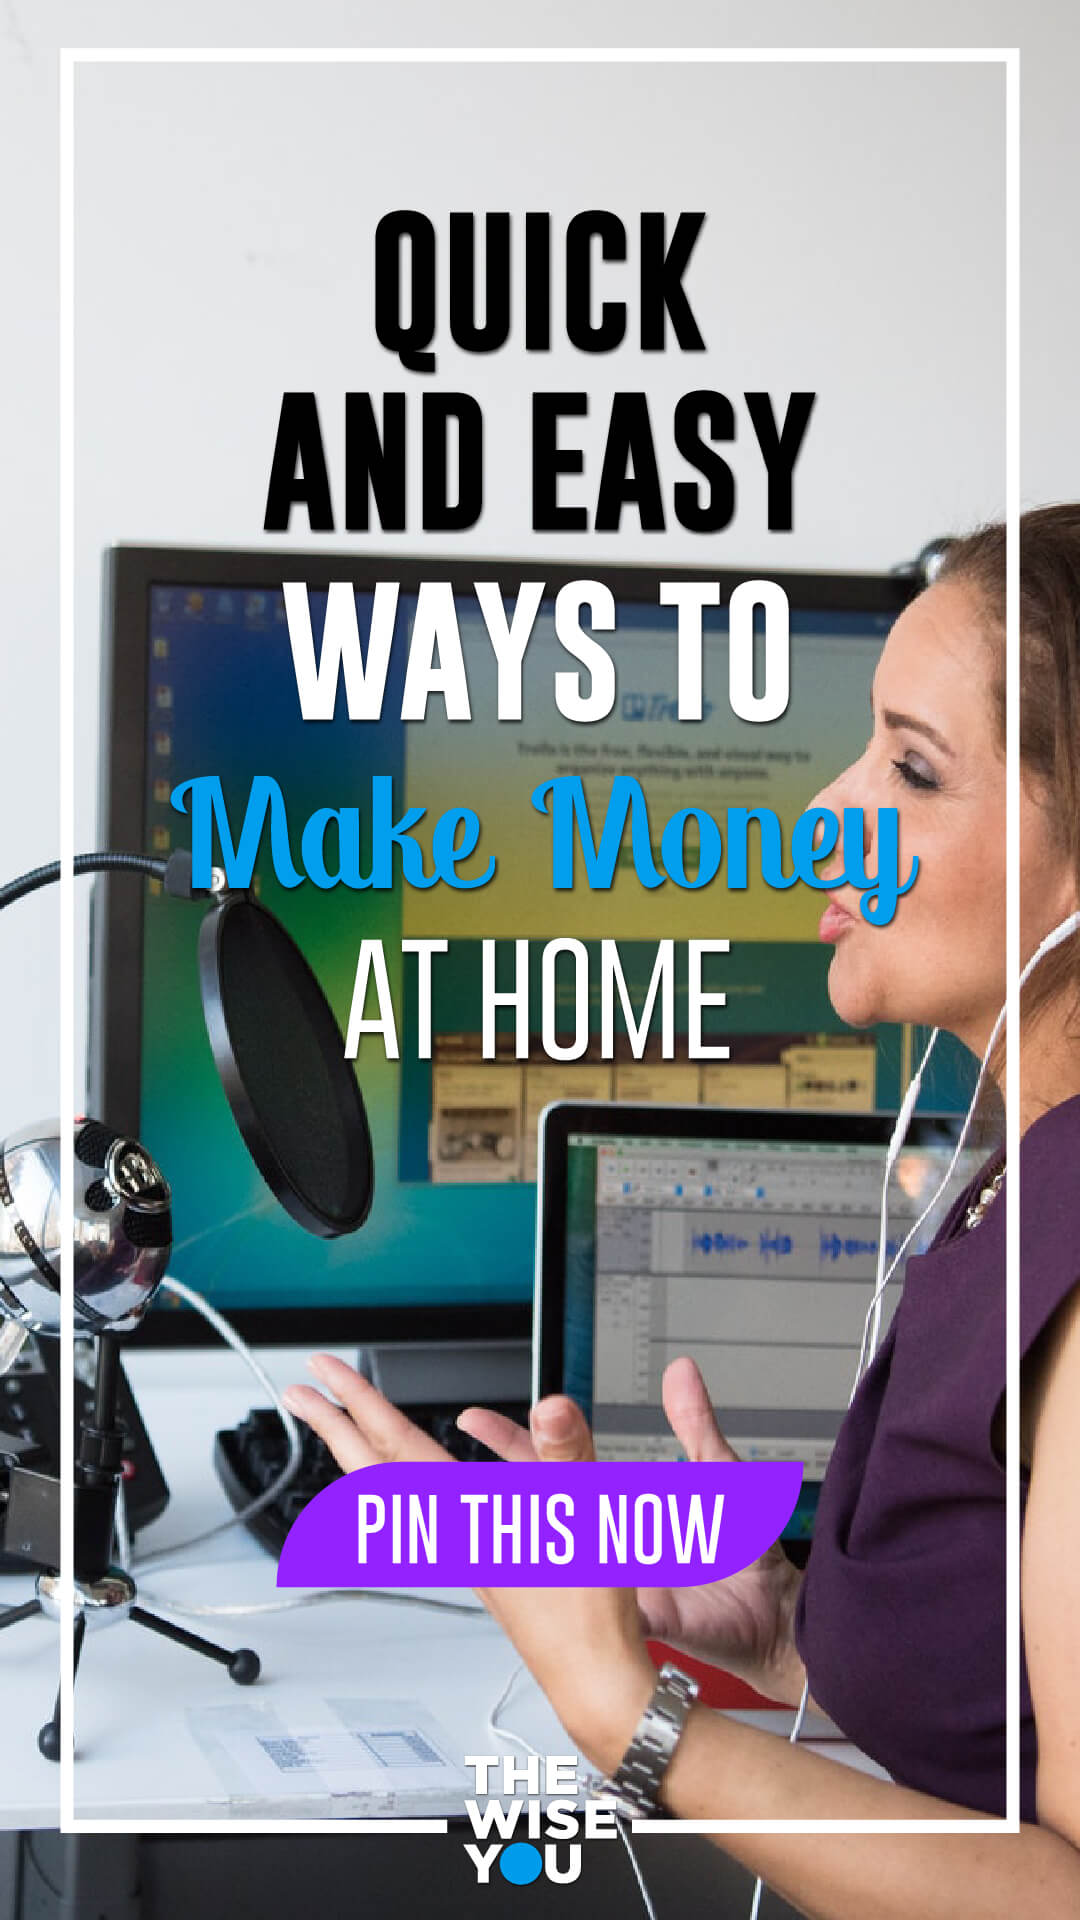 Quick and Easy Ways to Make Money at Home